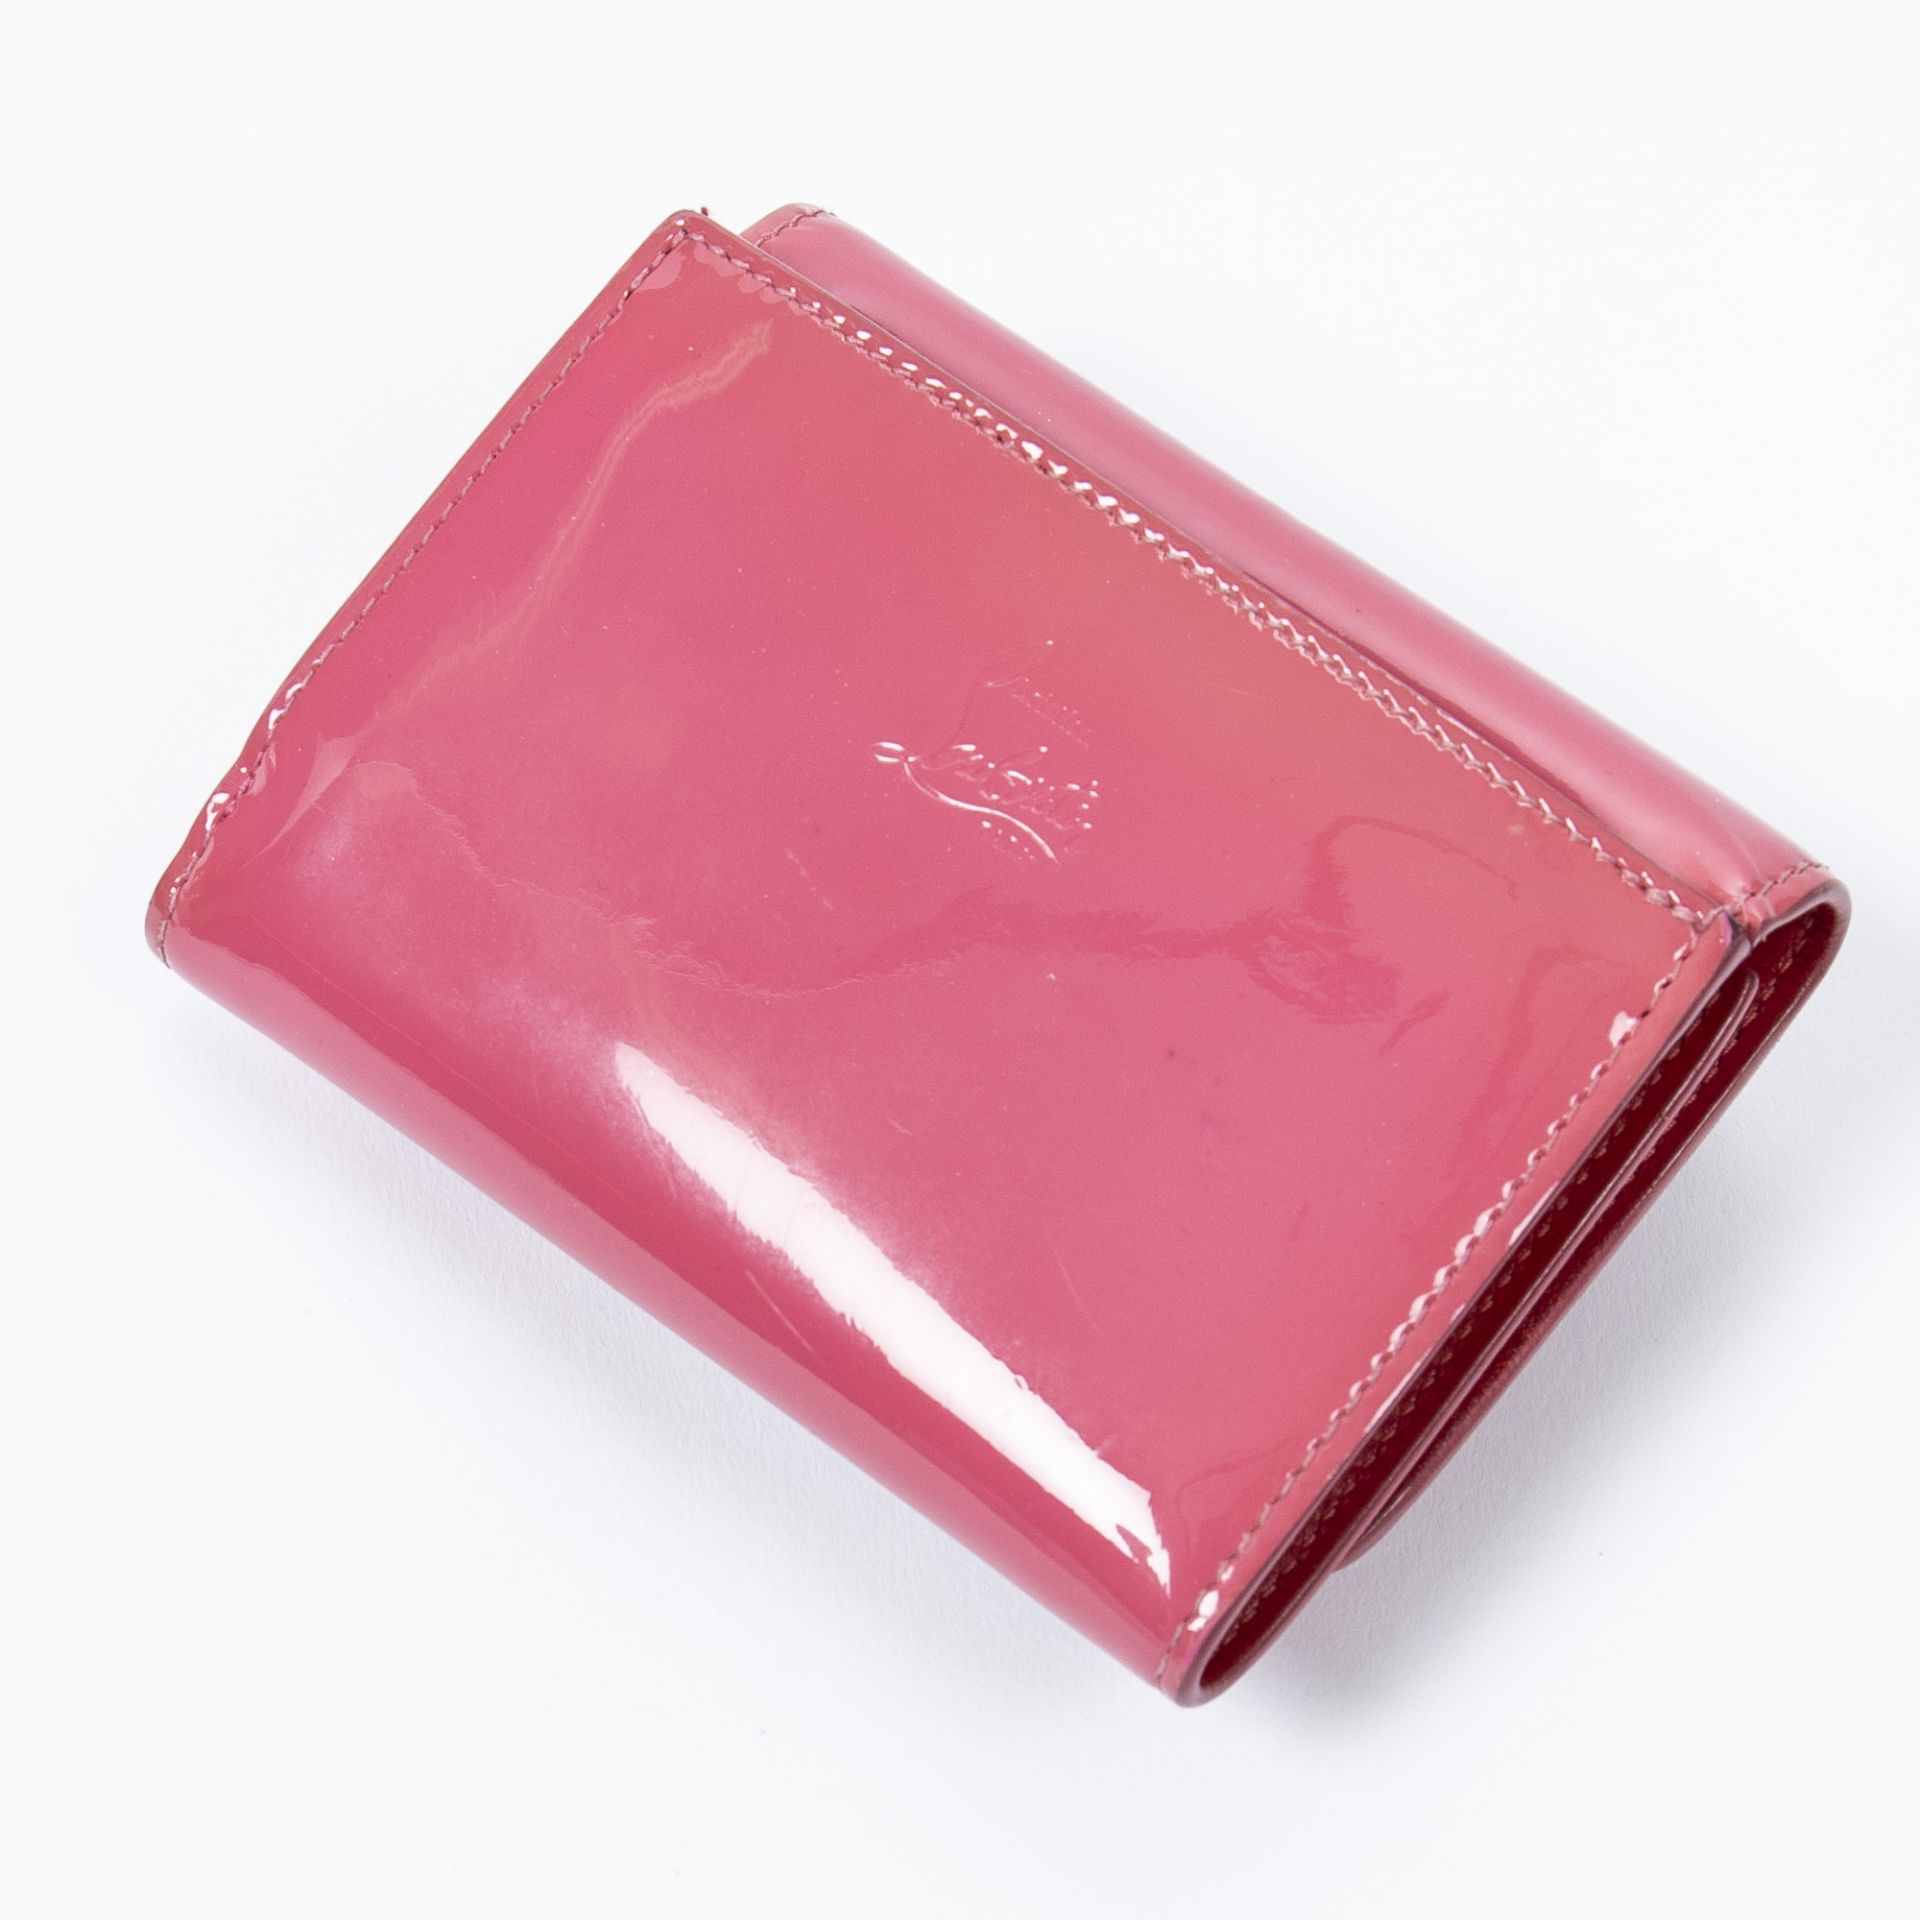 RRP £475.00 Lot To Contain 1 Christian Louboutin Calf Leather Macaron Mini Wallet In Pink - 11*8,5* - Image 2 of 2